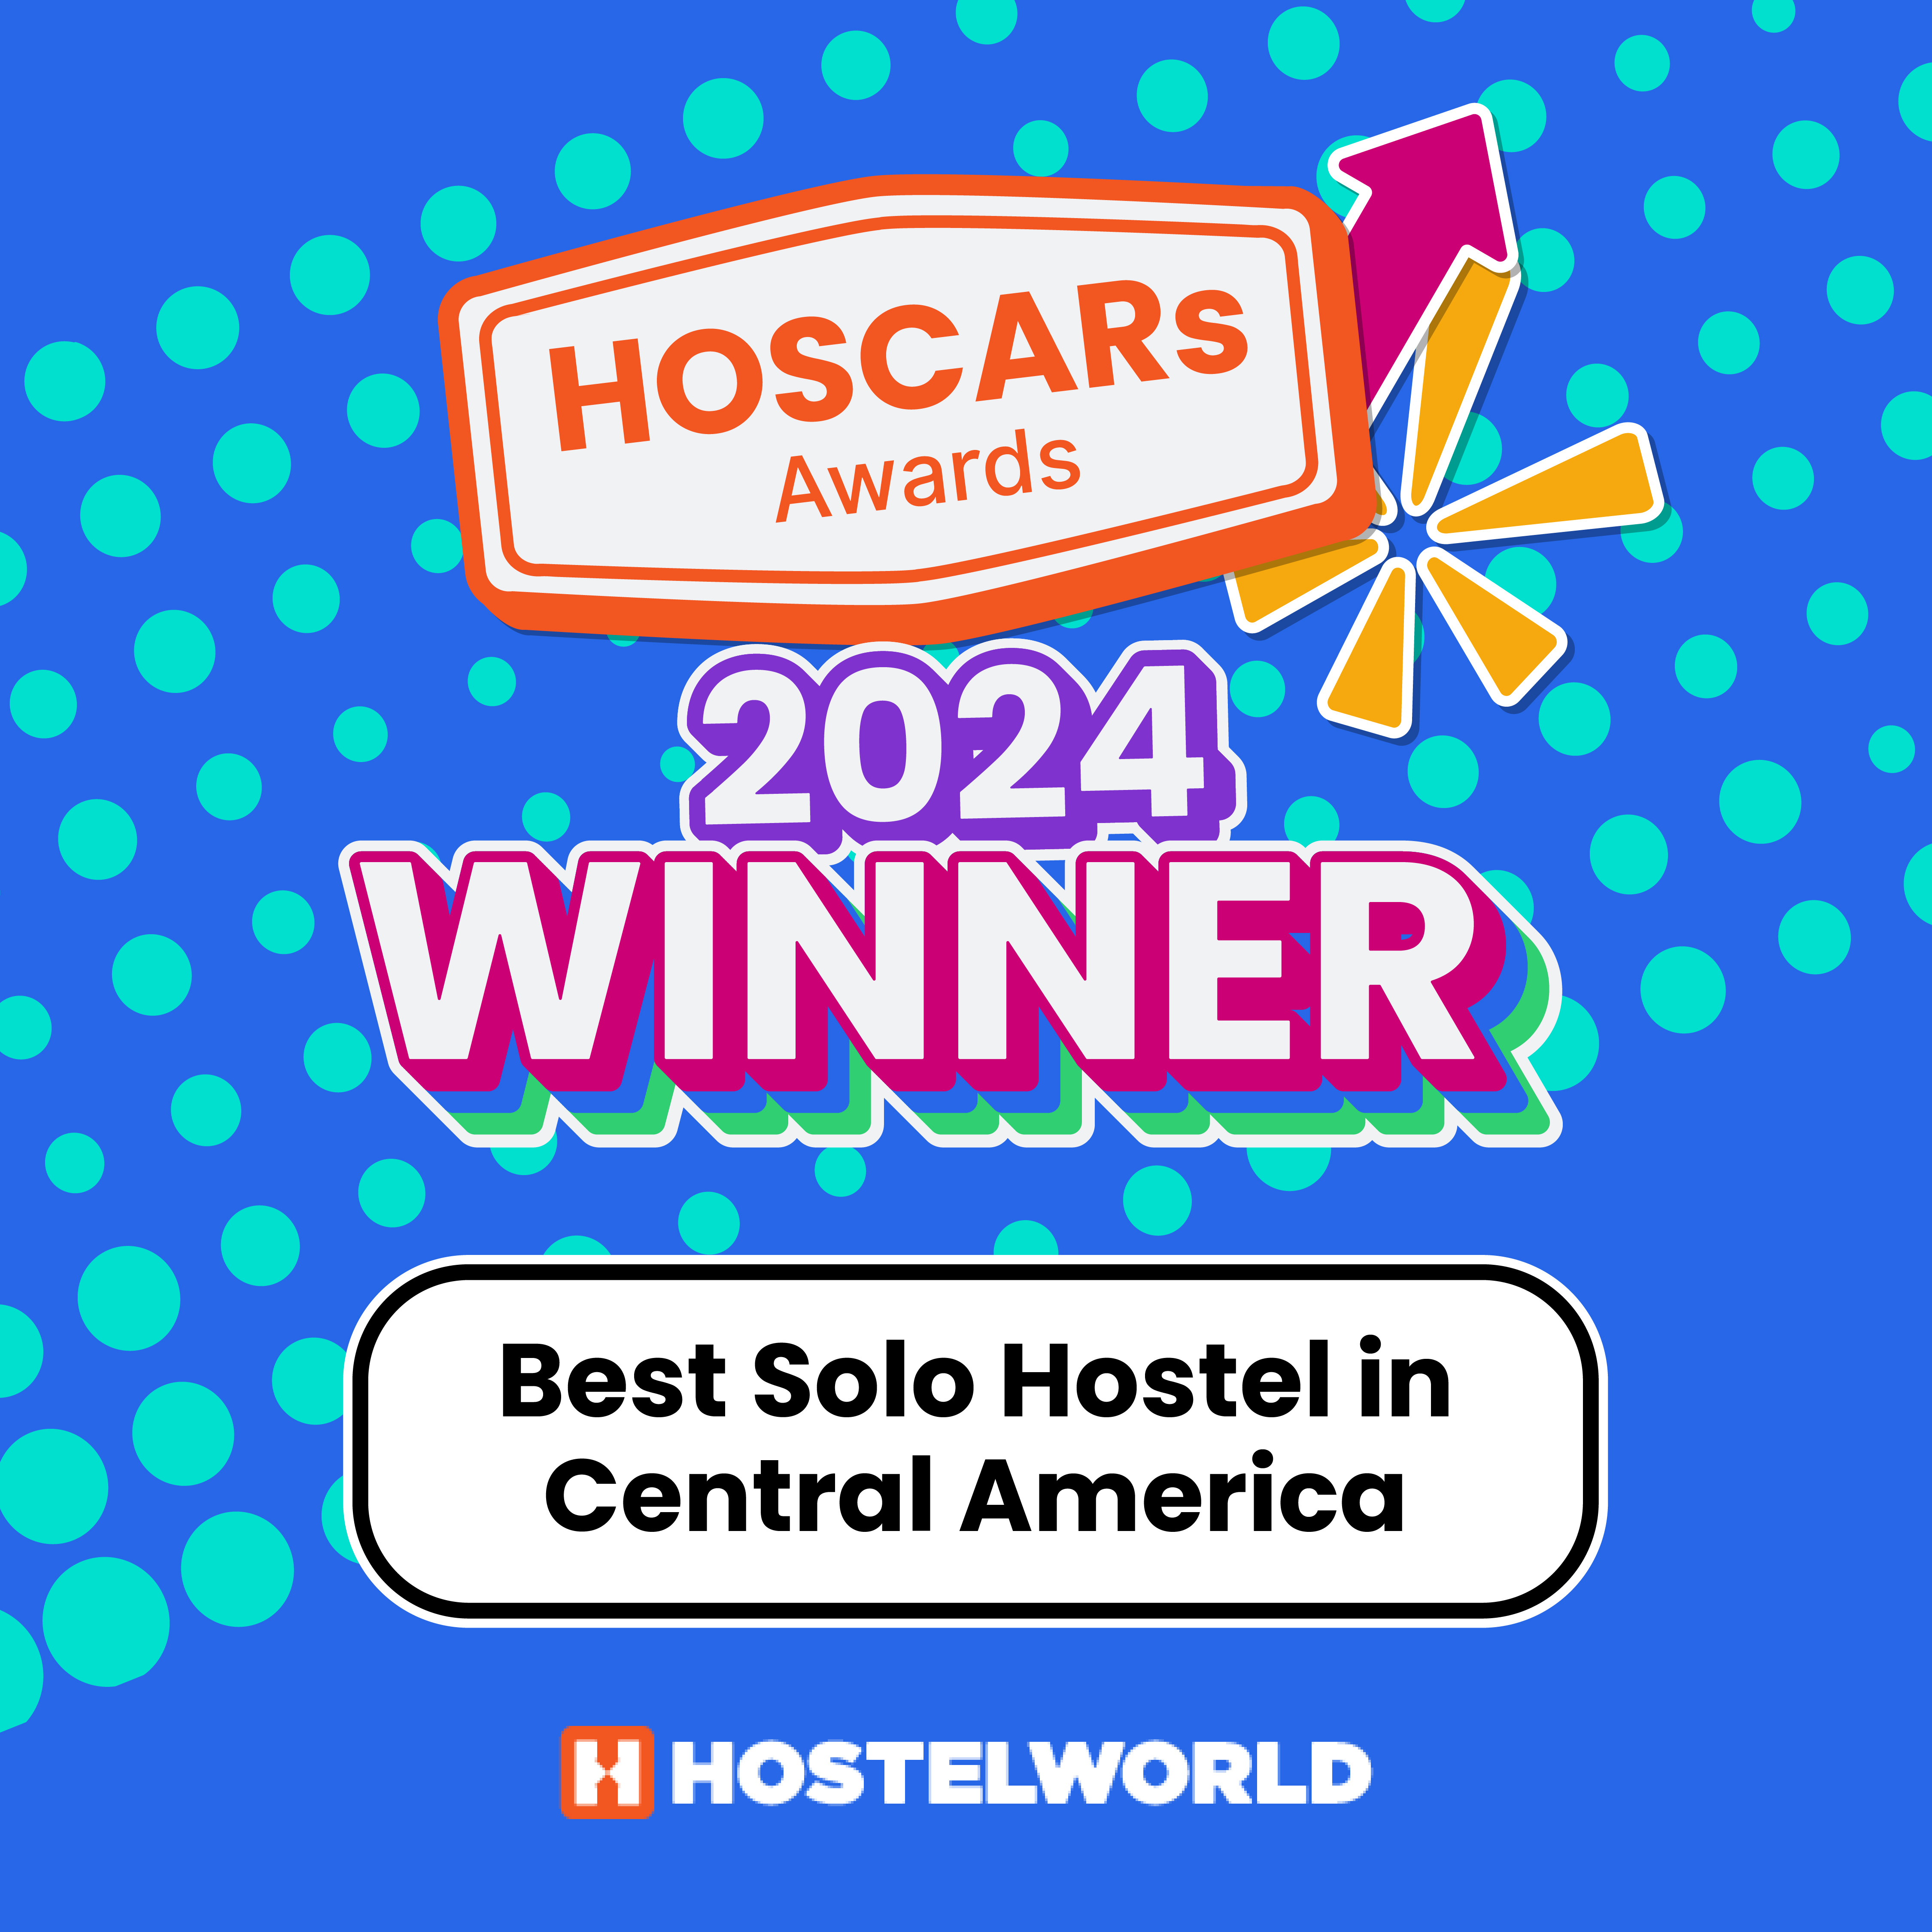 Best Solo Hostel in Central America